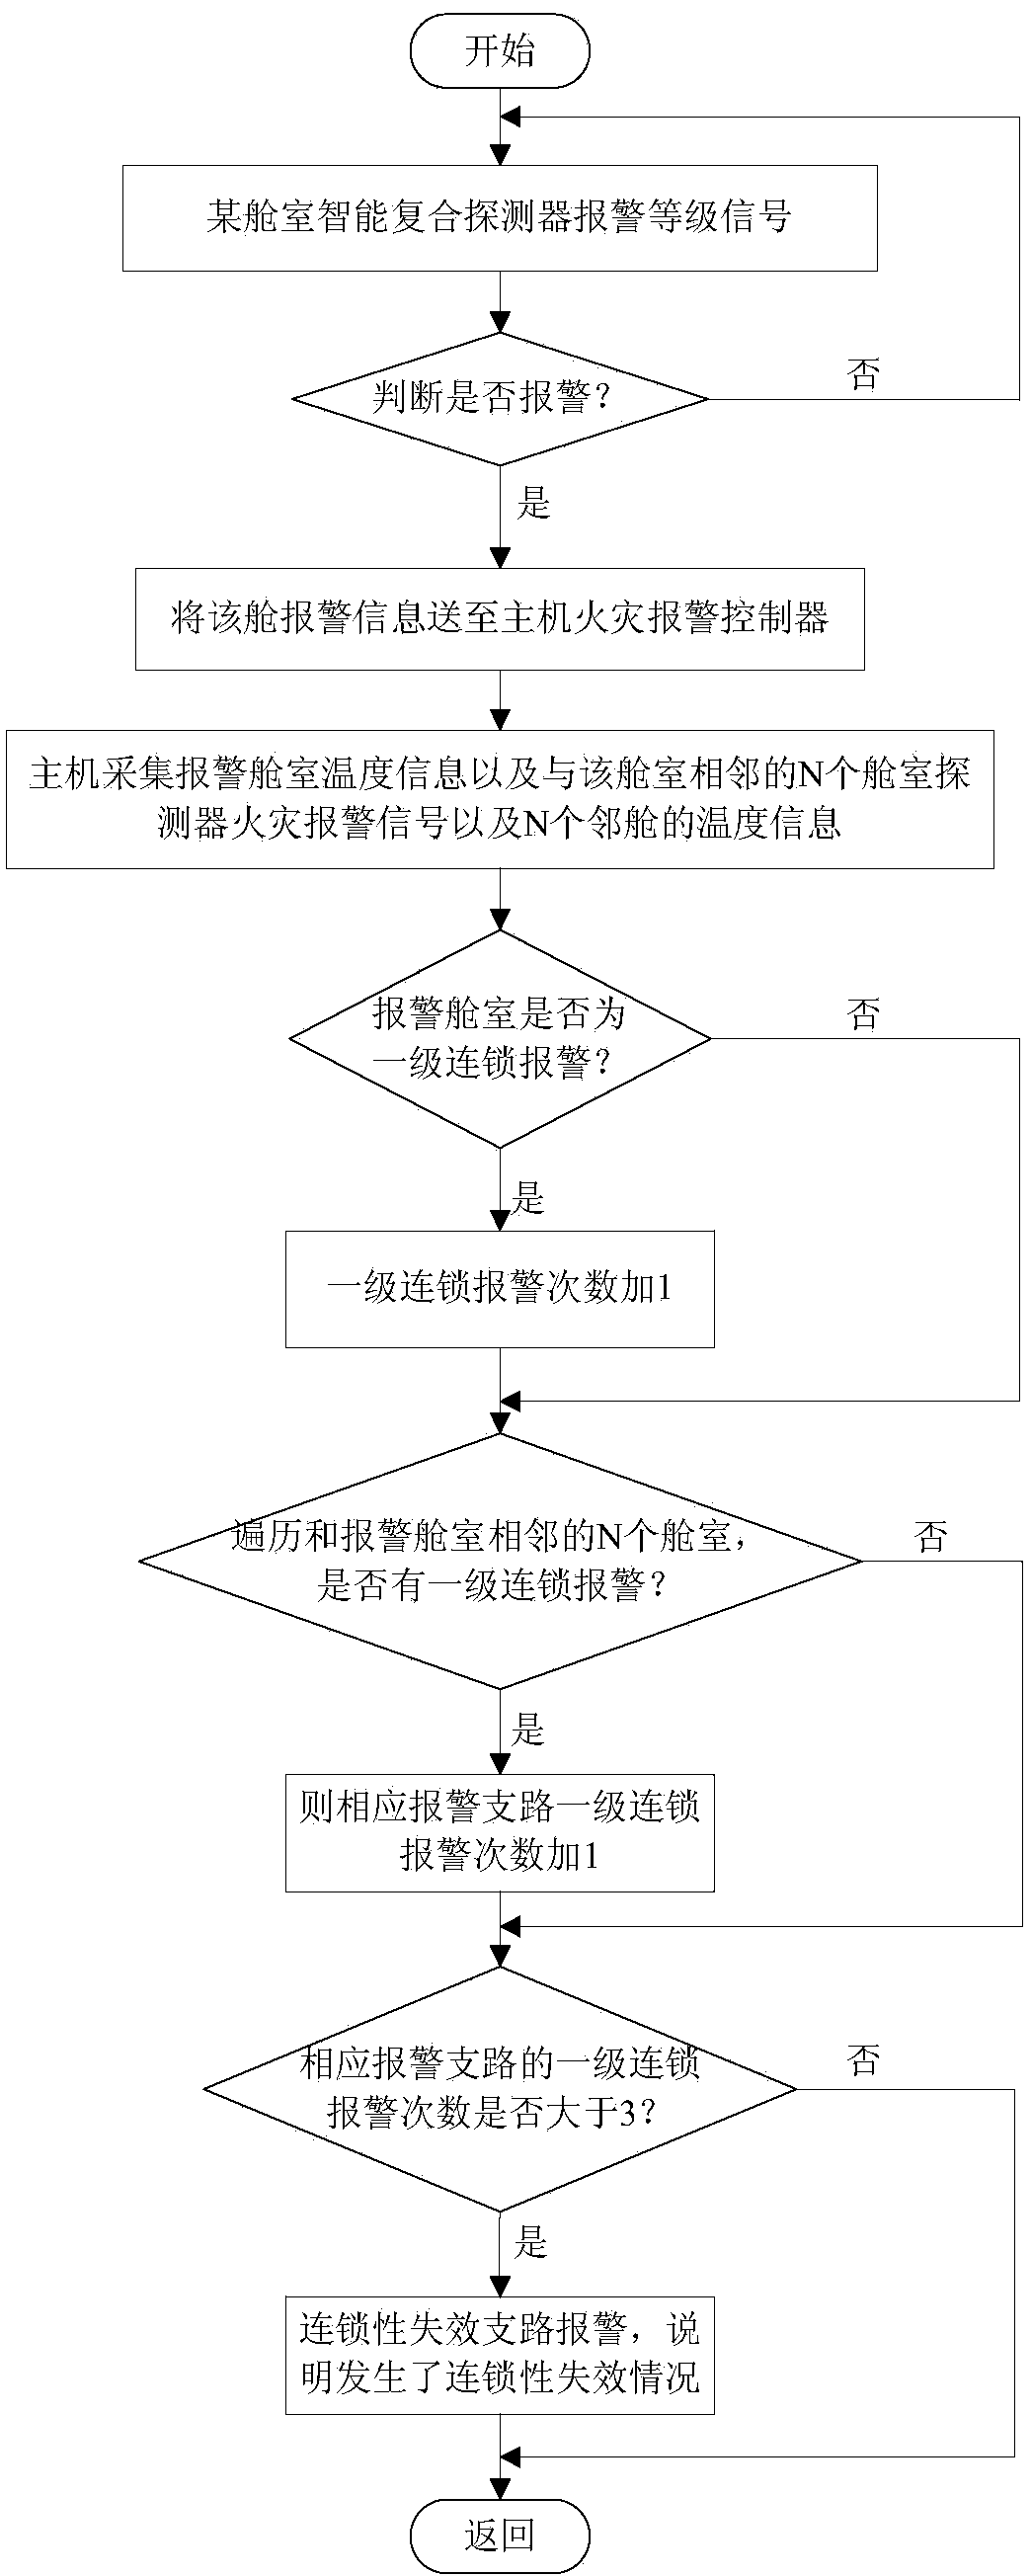 Ship fire extinguishing system cascading failure evaluation method for distributed intelligence control